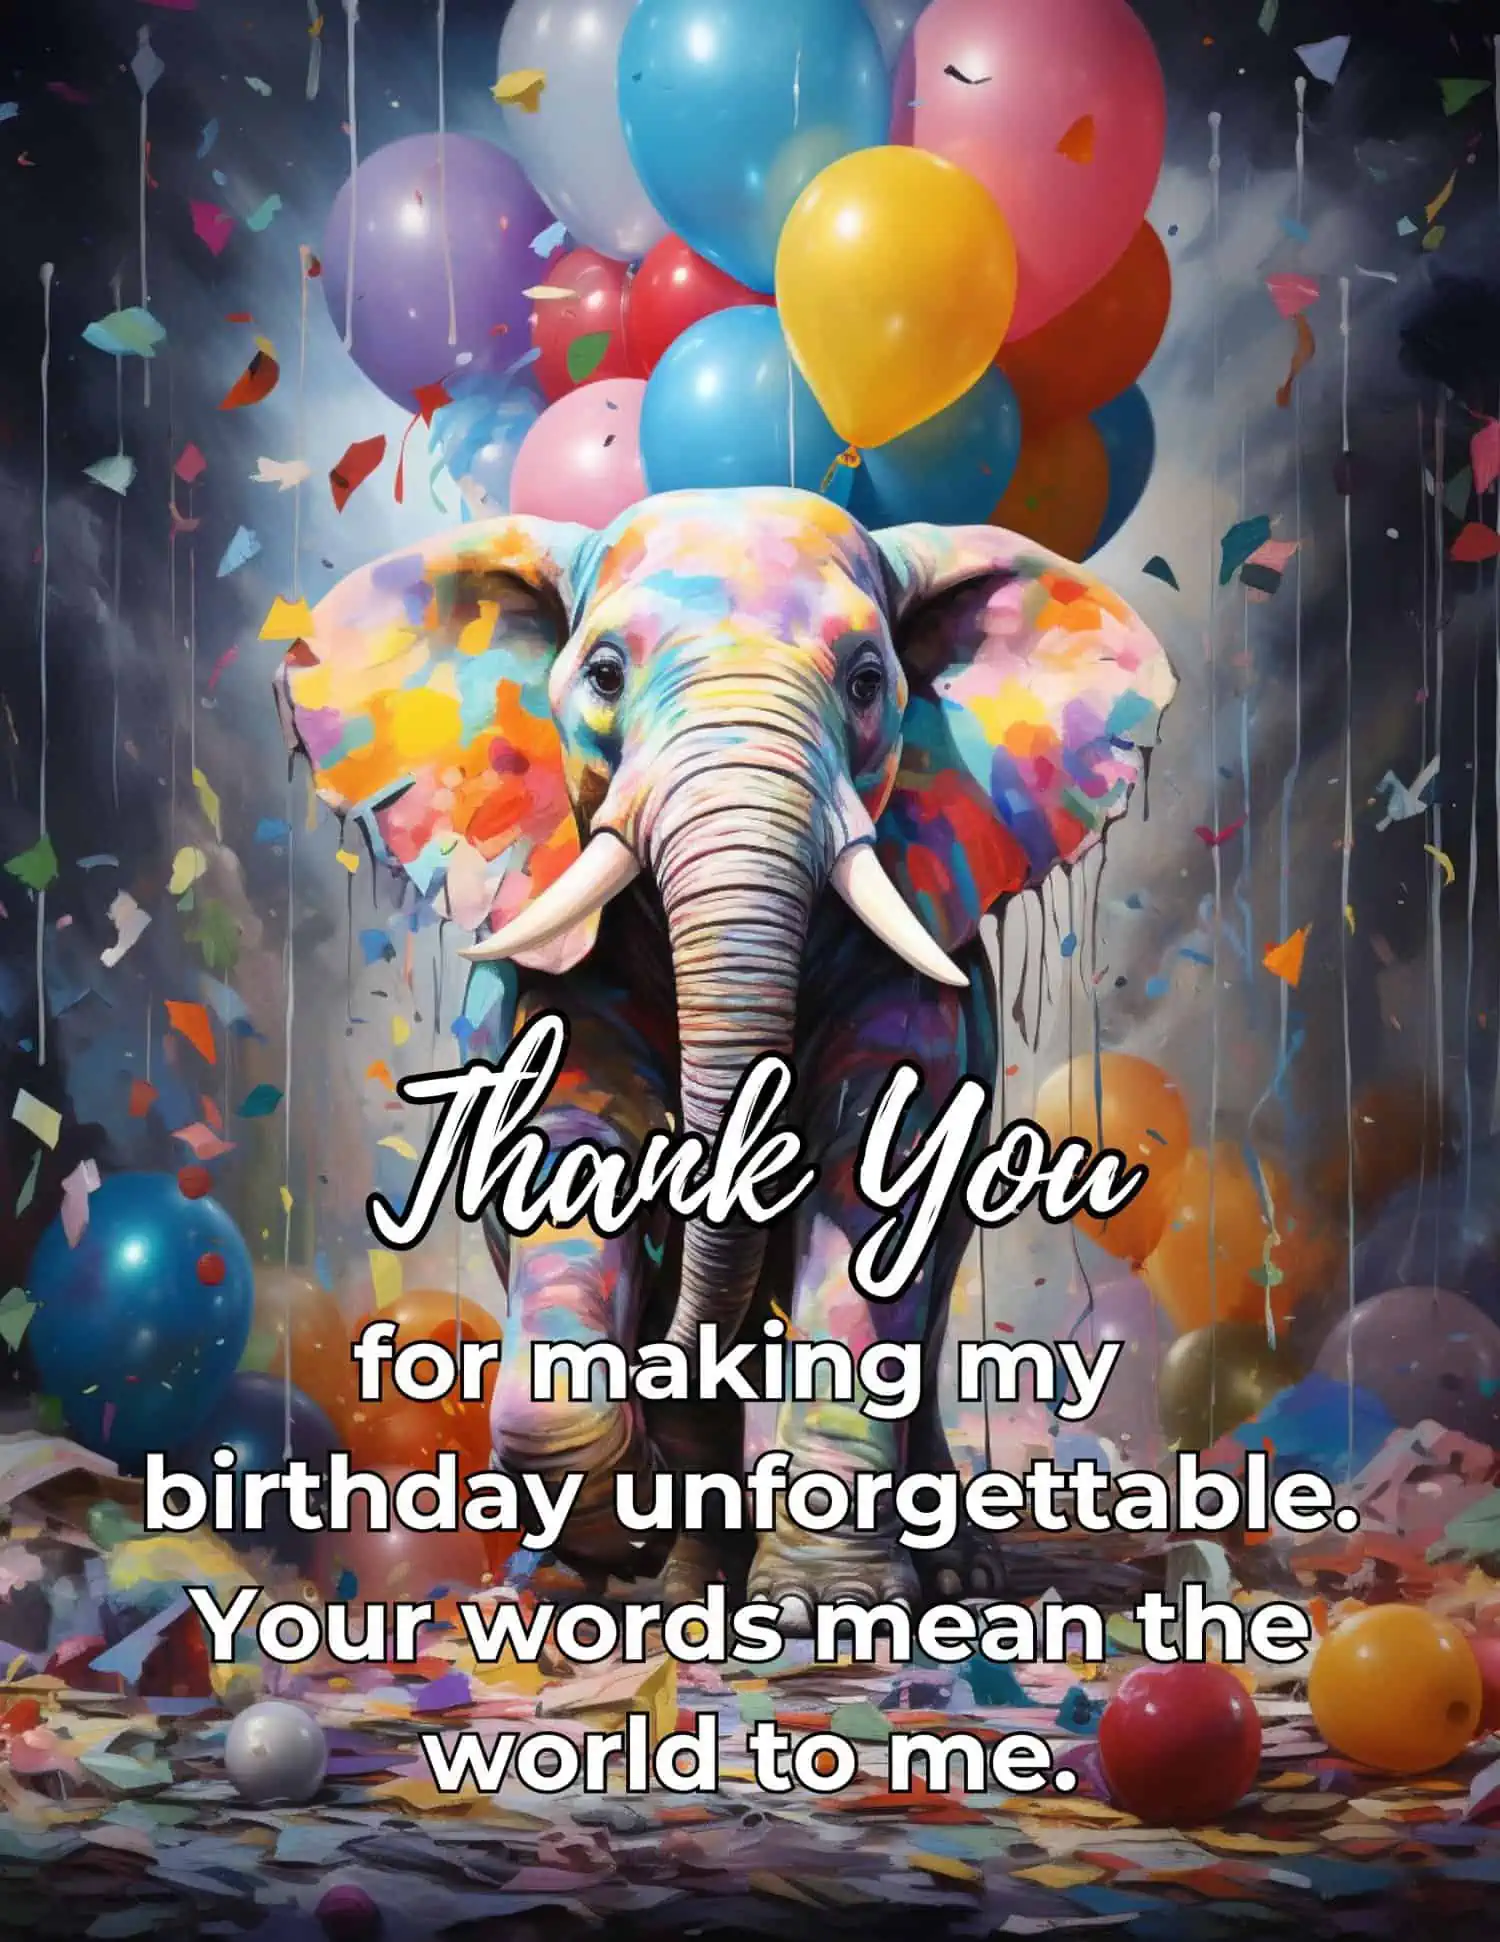 A lively collection of thank you messages for birthday wishes, enhanced with emojis for a fun and contemporary touch.